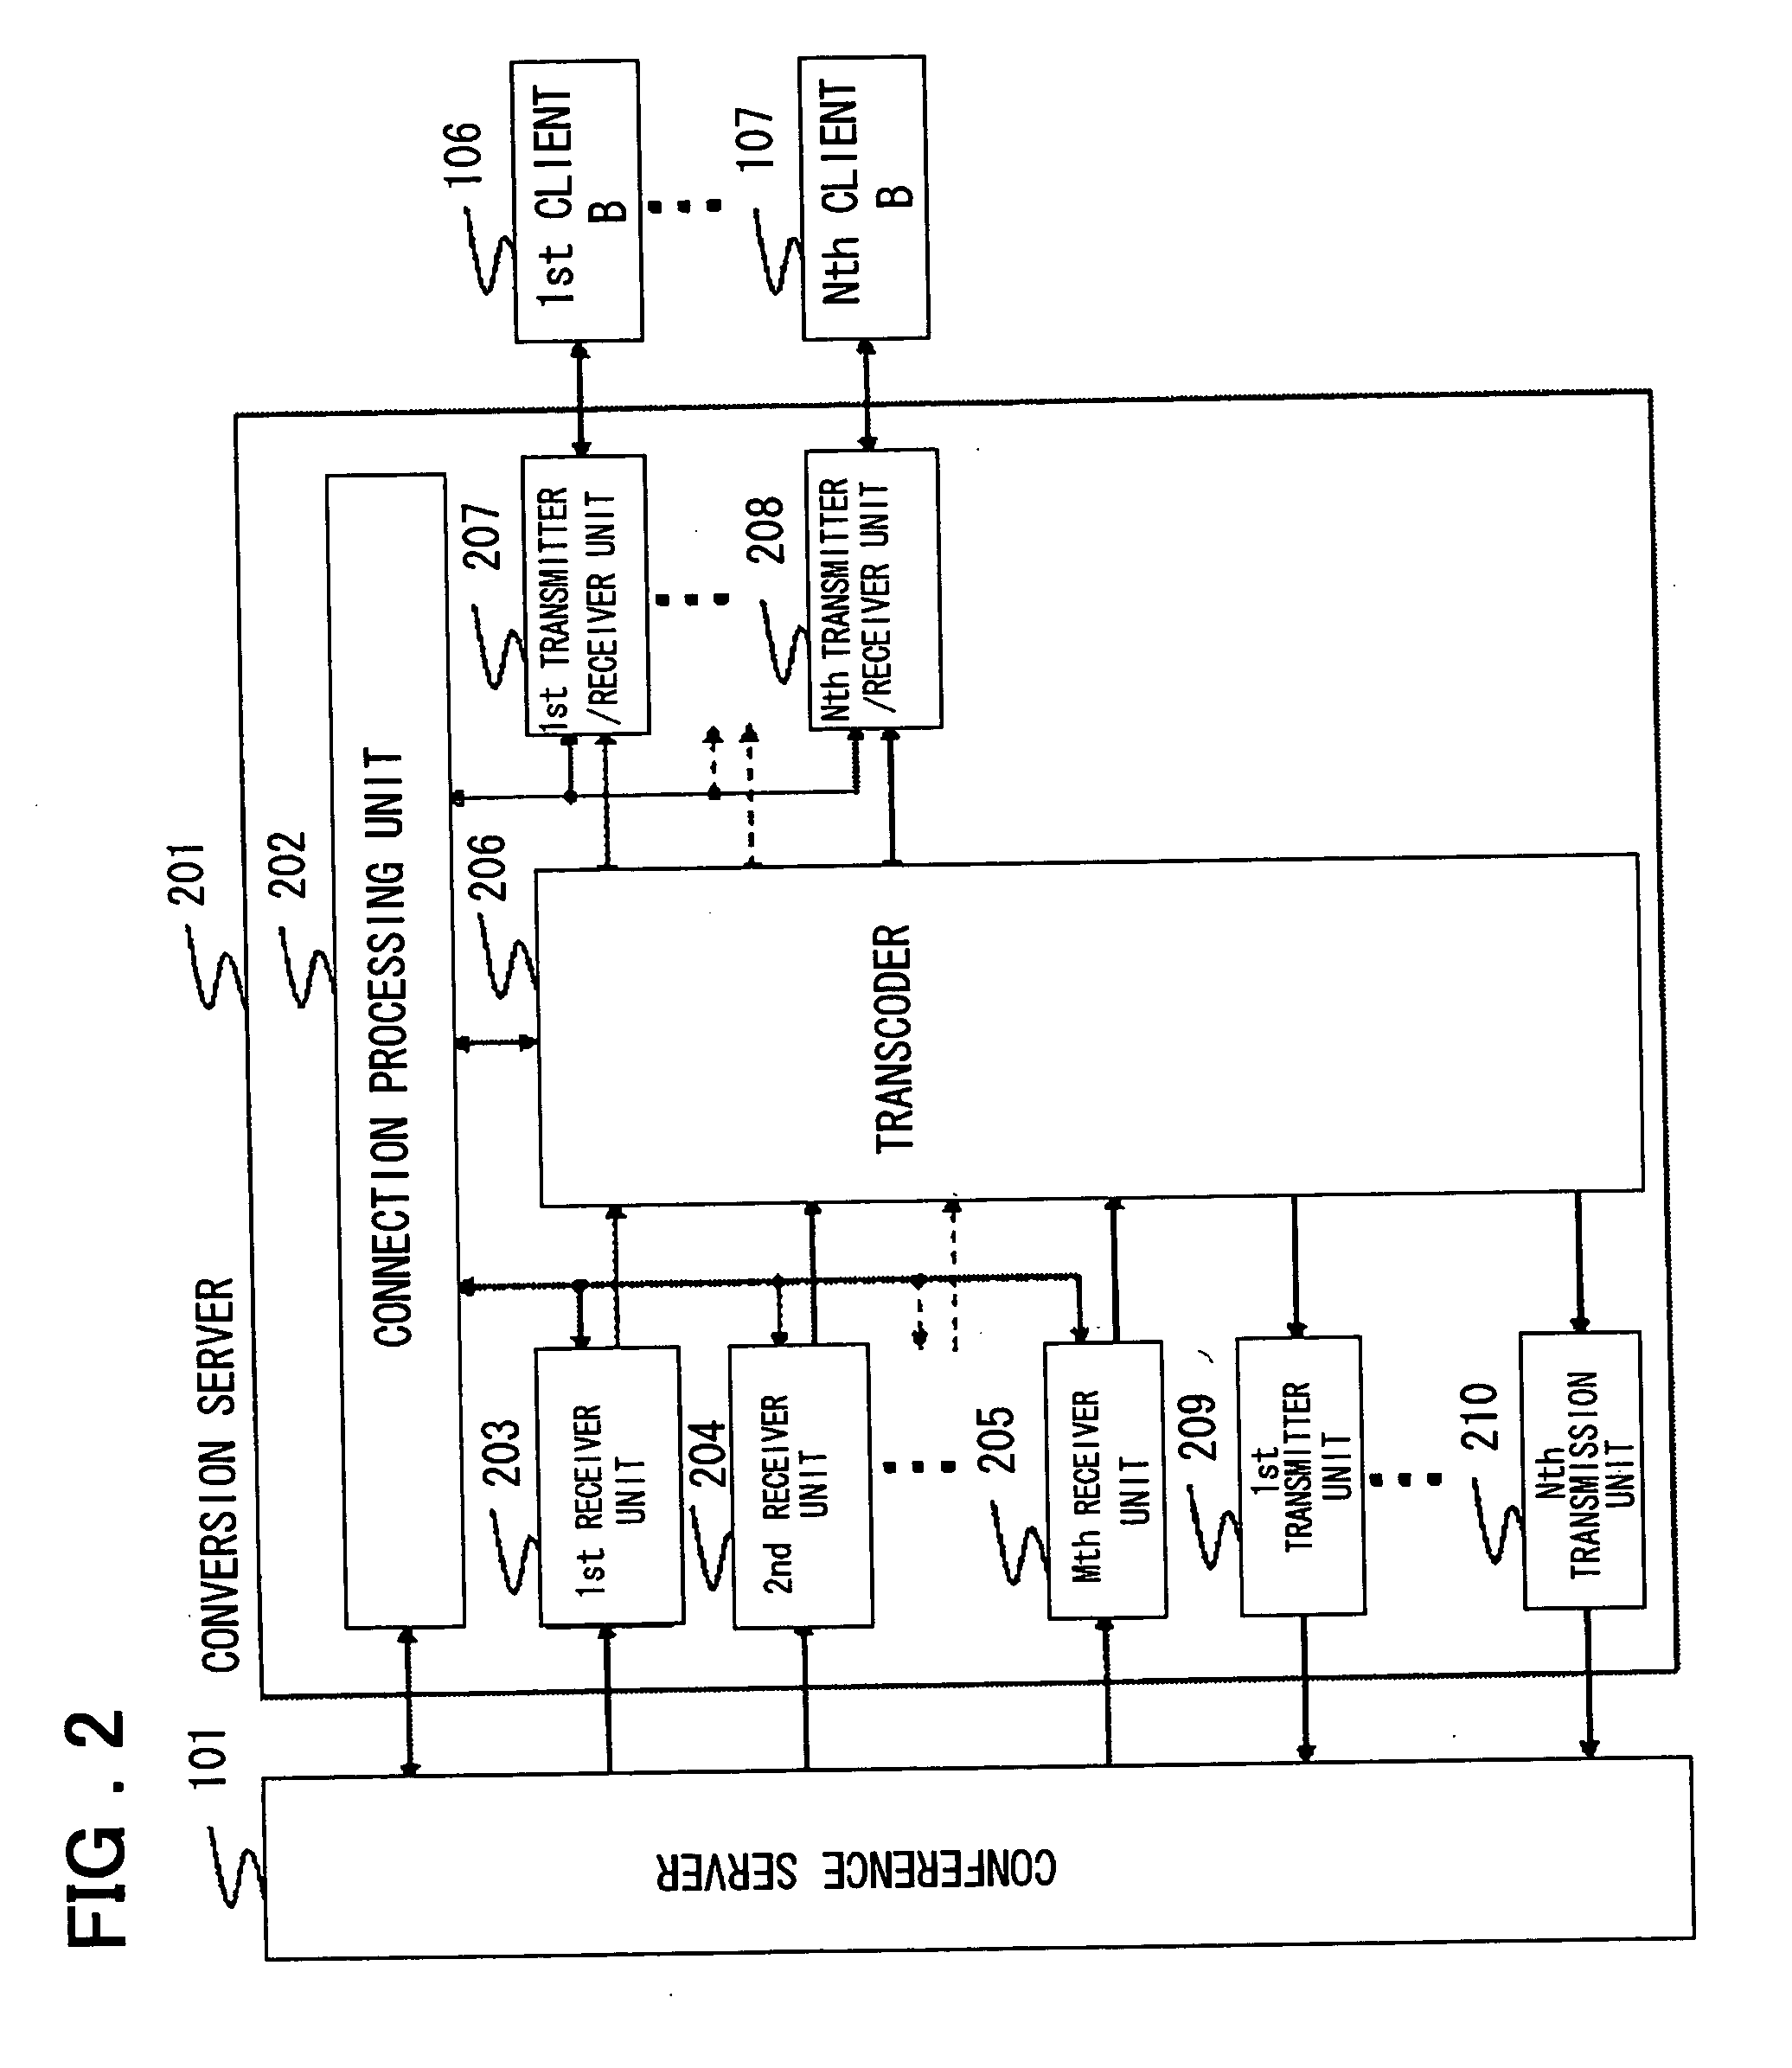 Method, apparatus, system, and program for switching image coded data